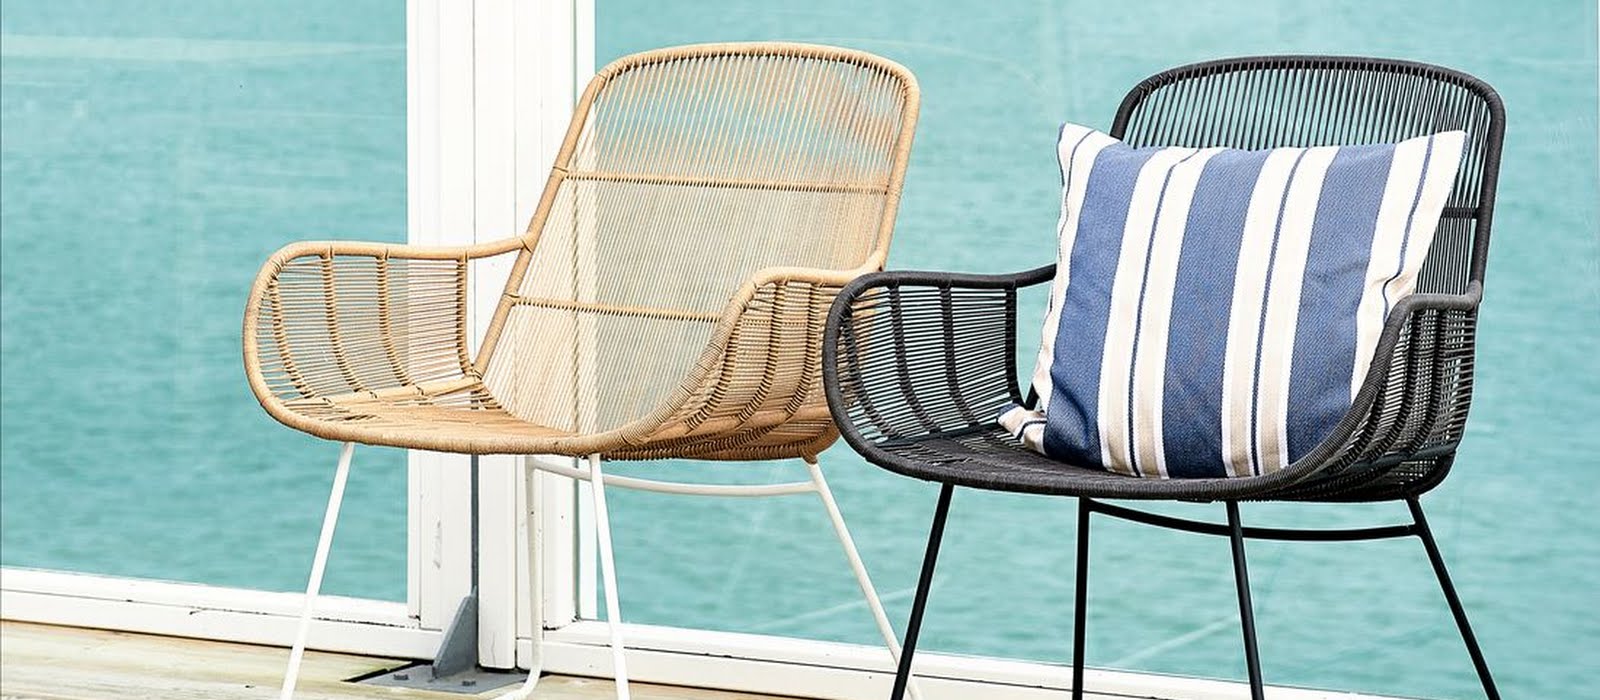 Transform your garden with our round-up of dreamy outdoor furniture